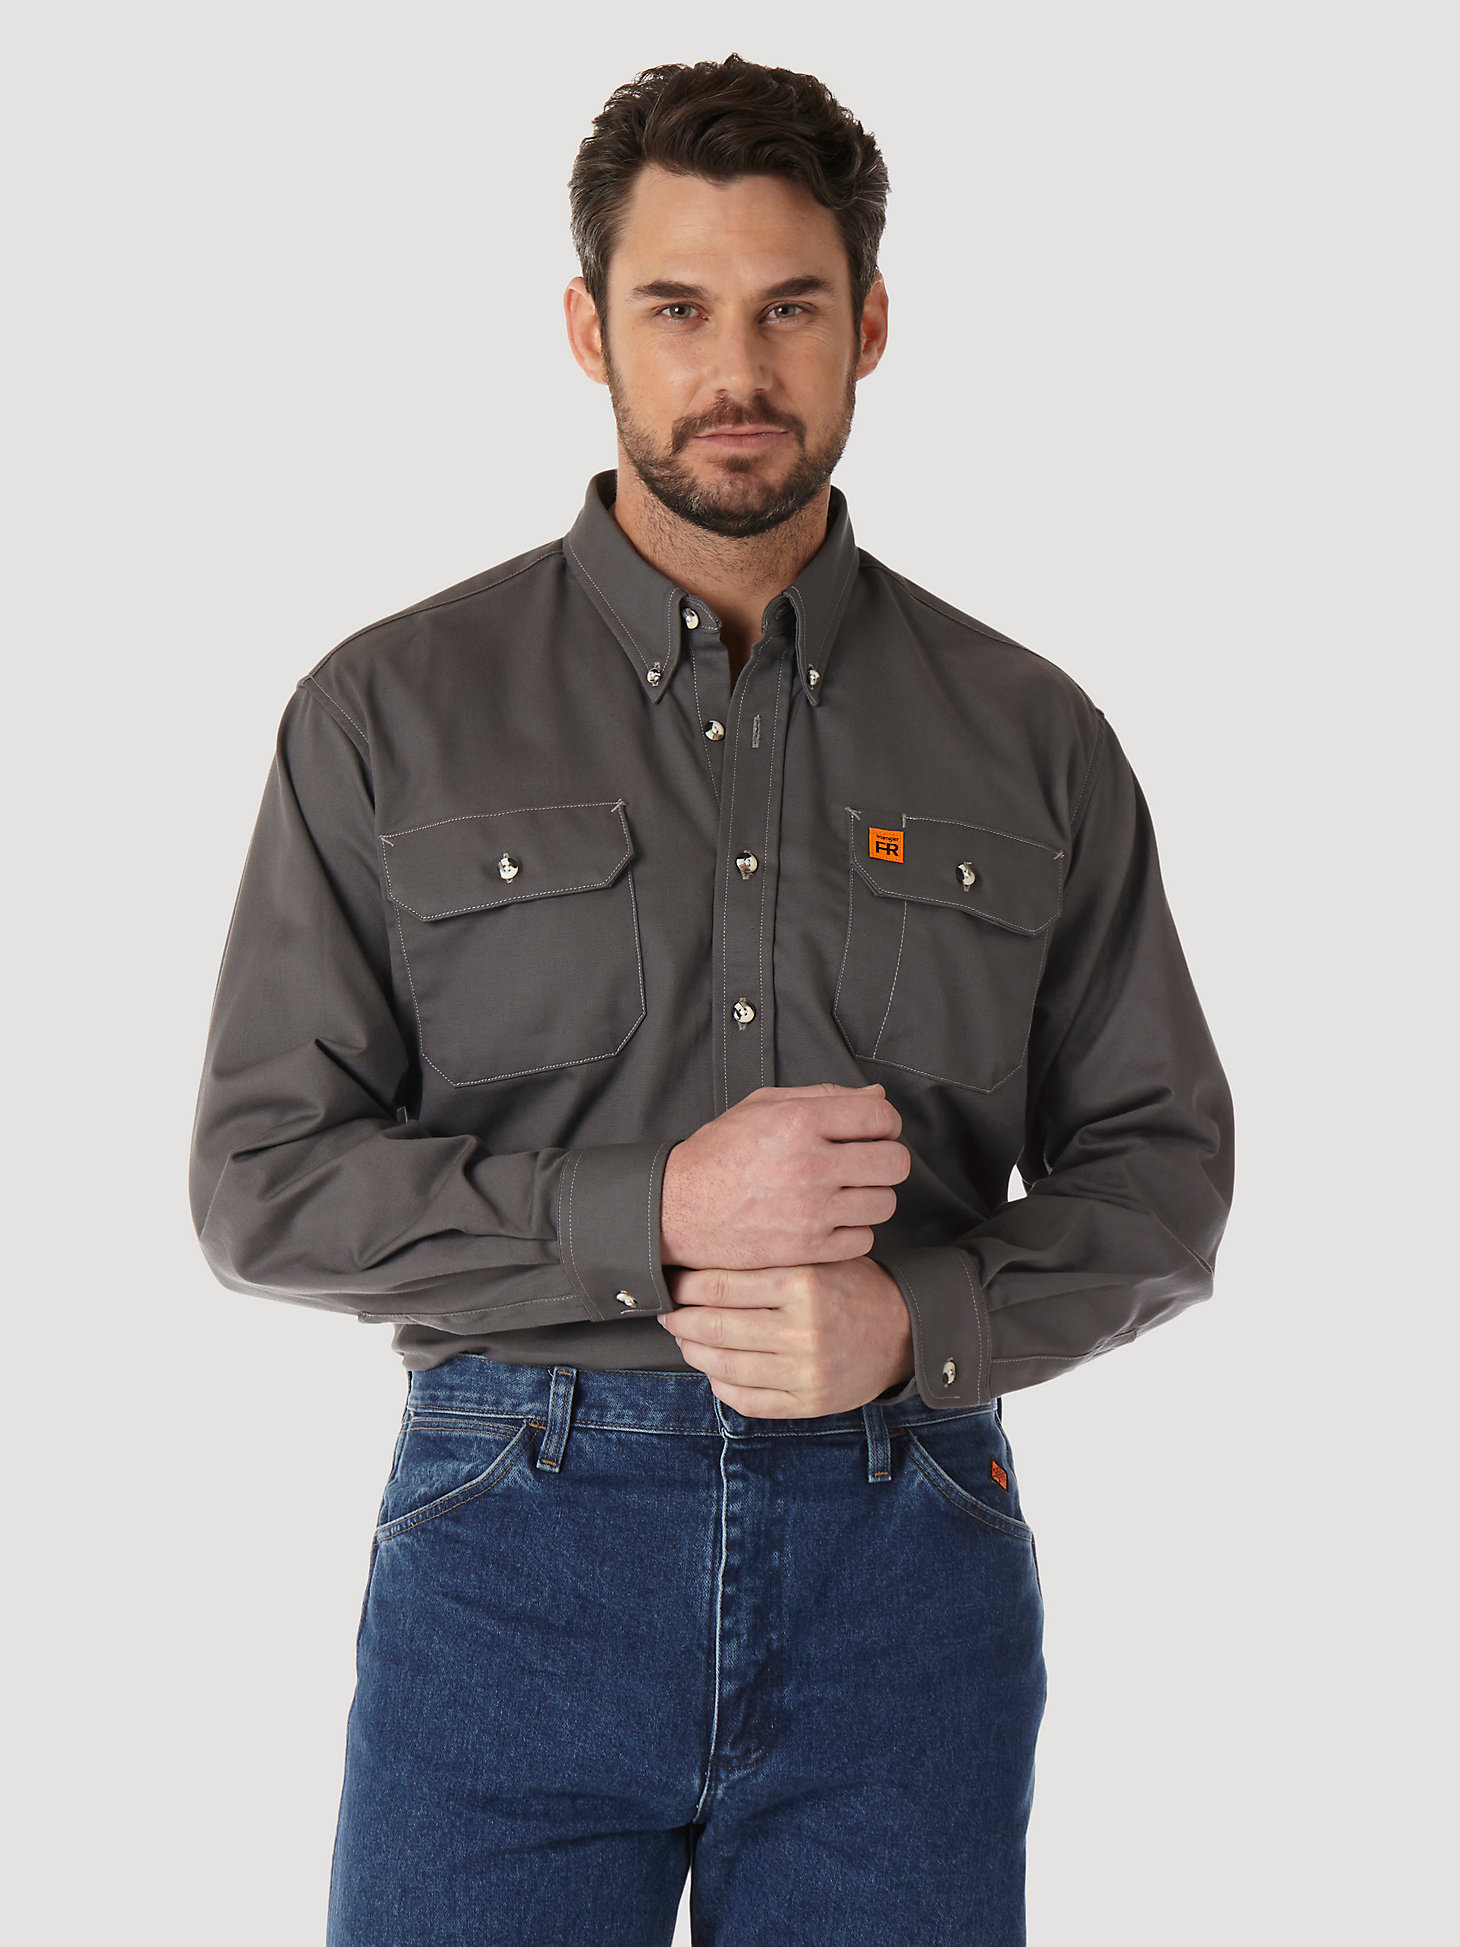 Wrangler® RIGGS Workwear® FR Flame Resistant Work Shirt in Slate Grey main view